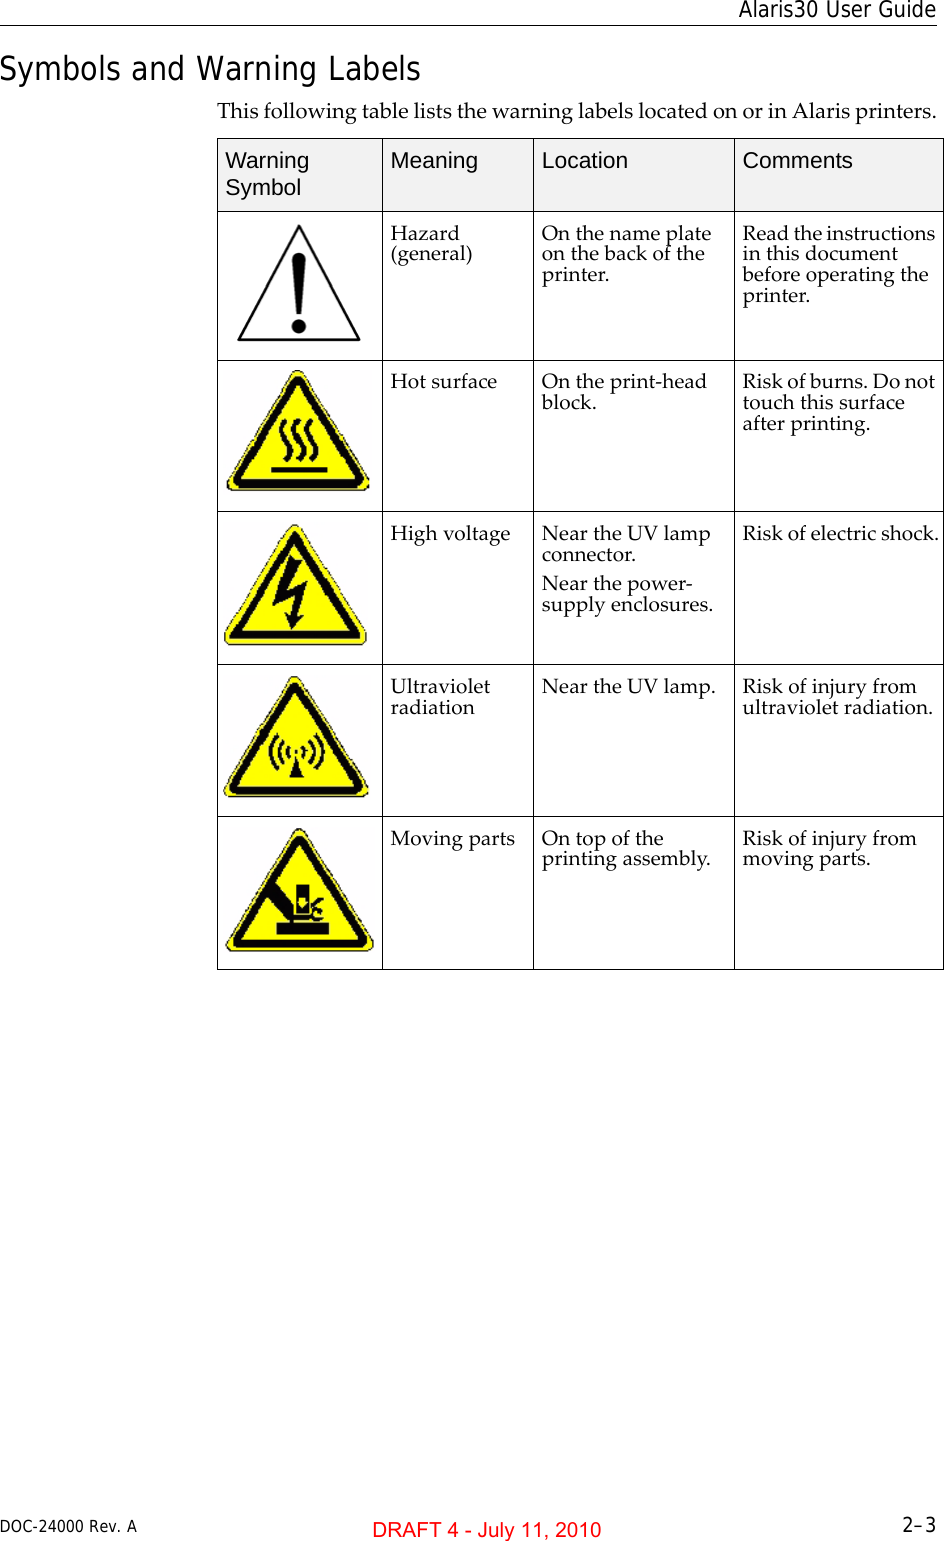 DOC-24000 Rev. A 2–3Alaris30 User GuideSymbols and Warning LabelsThisfollowingtableliststhewarninglabelslocatedonorinAlarisprinters.Warning Symbol Meaning Location CommentsHazard(general) Onthenameplateonthebackoftheprinter.Readtheinstructionsinthisdocumentbeforeoperatingtheprinter.HotsurfaceOntheprint‐headblock. Riskofburns.Donottouchthissurfaceafterprinting.HighvoltageNeartheUVlampconnector.Nearthepower‐supplyenclosures.Riskofelectricshock.Ultravioletradiation NeartheUVlamp. Riskofinjuryfromultravioletradiation.Movingparts Ontopoftheprintingassembly. Riskofinjuryfrommovingparts.DRAFT 4 - July 11, 2010